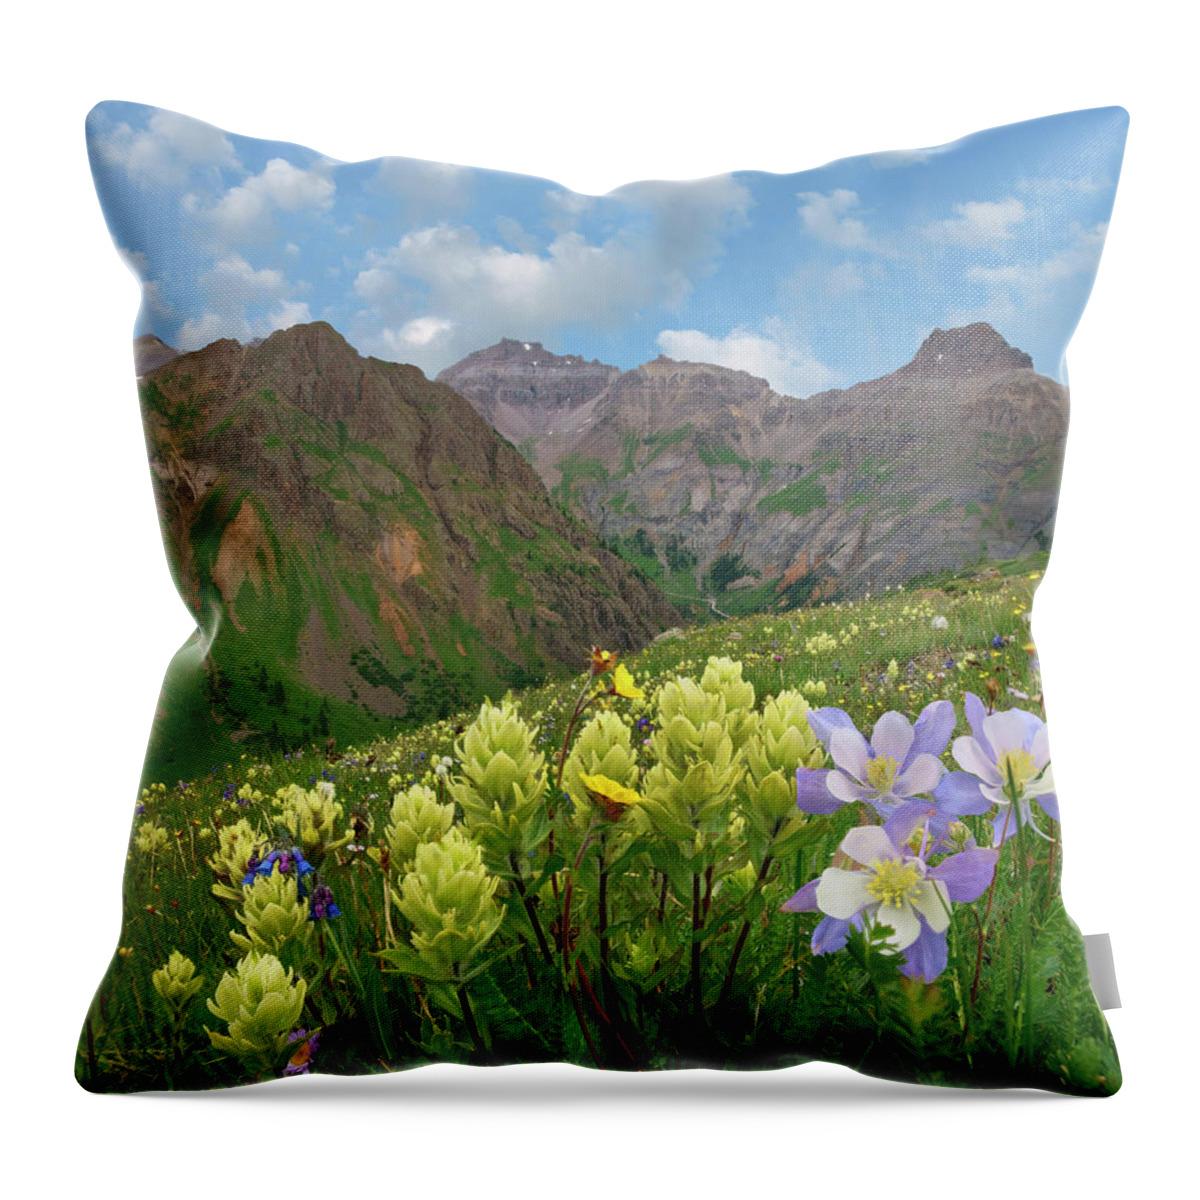 00555621 Throw Pillow featuring the photograph Paintbrush And Columbine, Governor Basin, Colorado by Tim Fitzharris